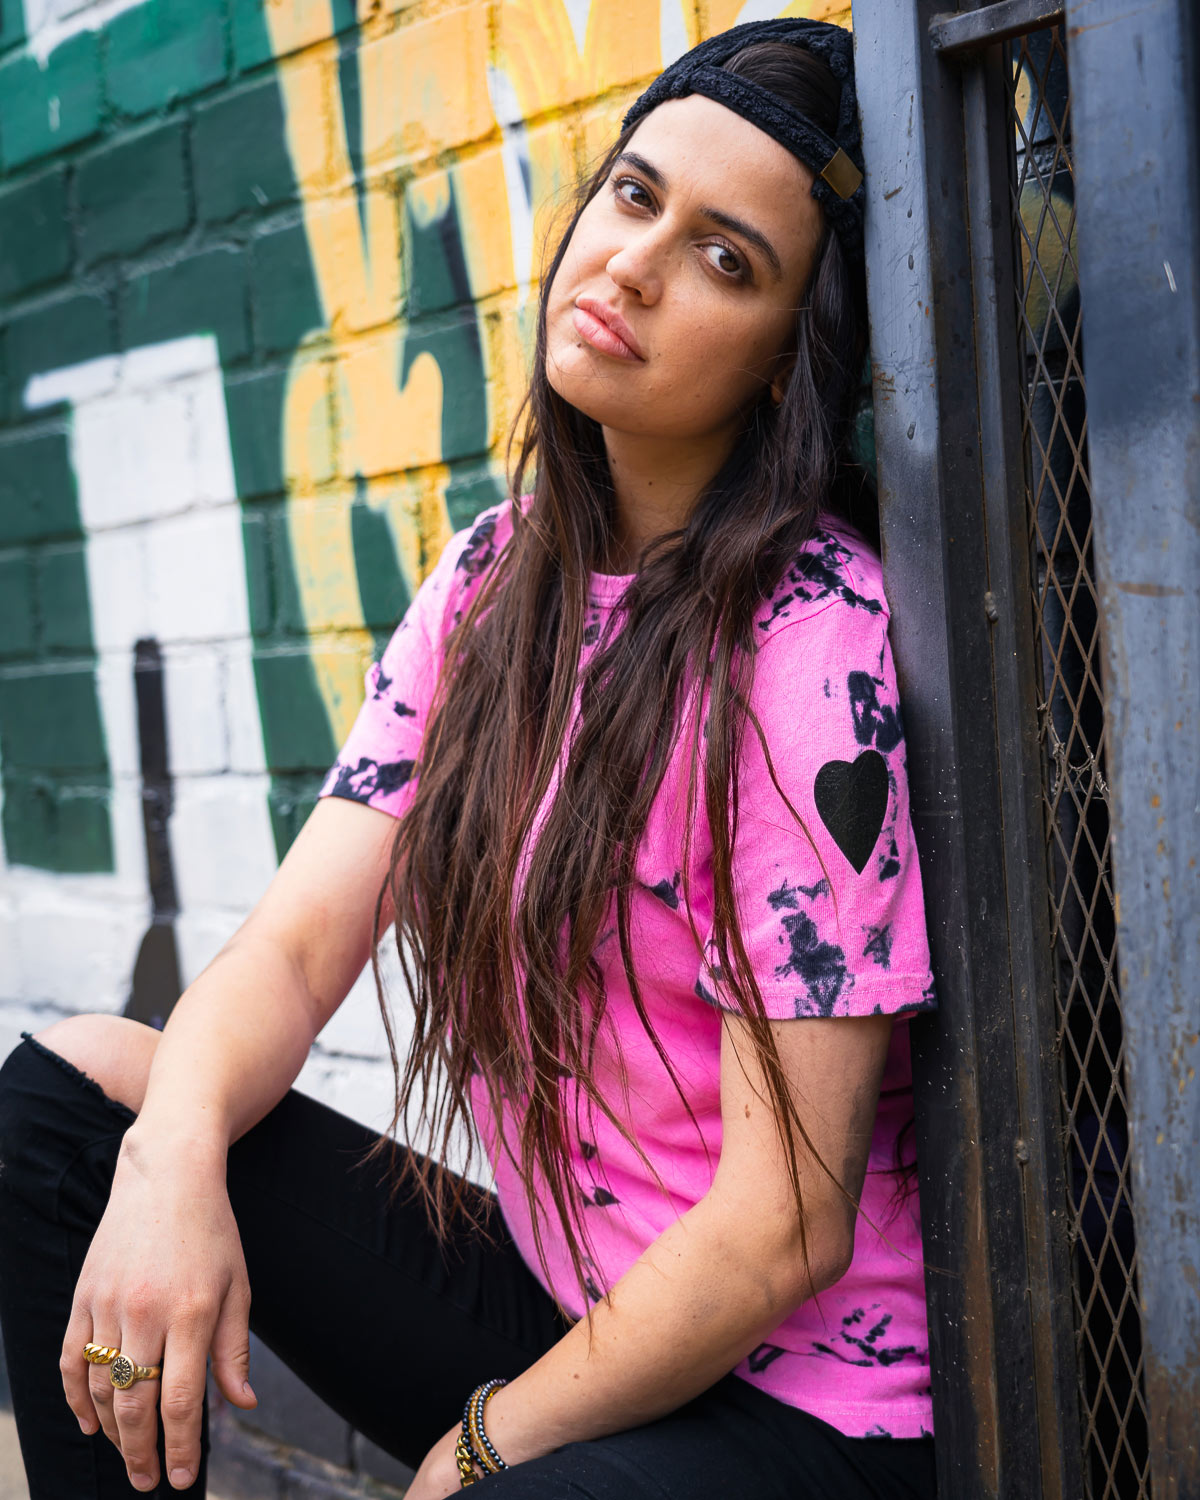 Model wearing pink and black hand dyed tie dye t-shirt against graffiti wall